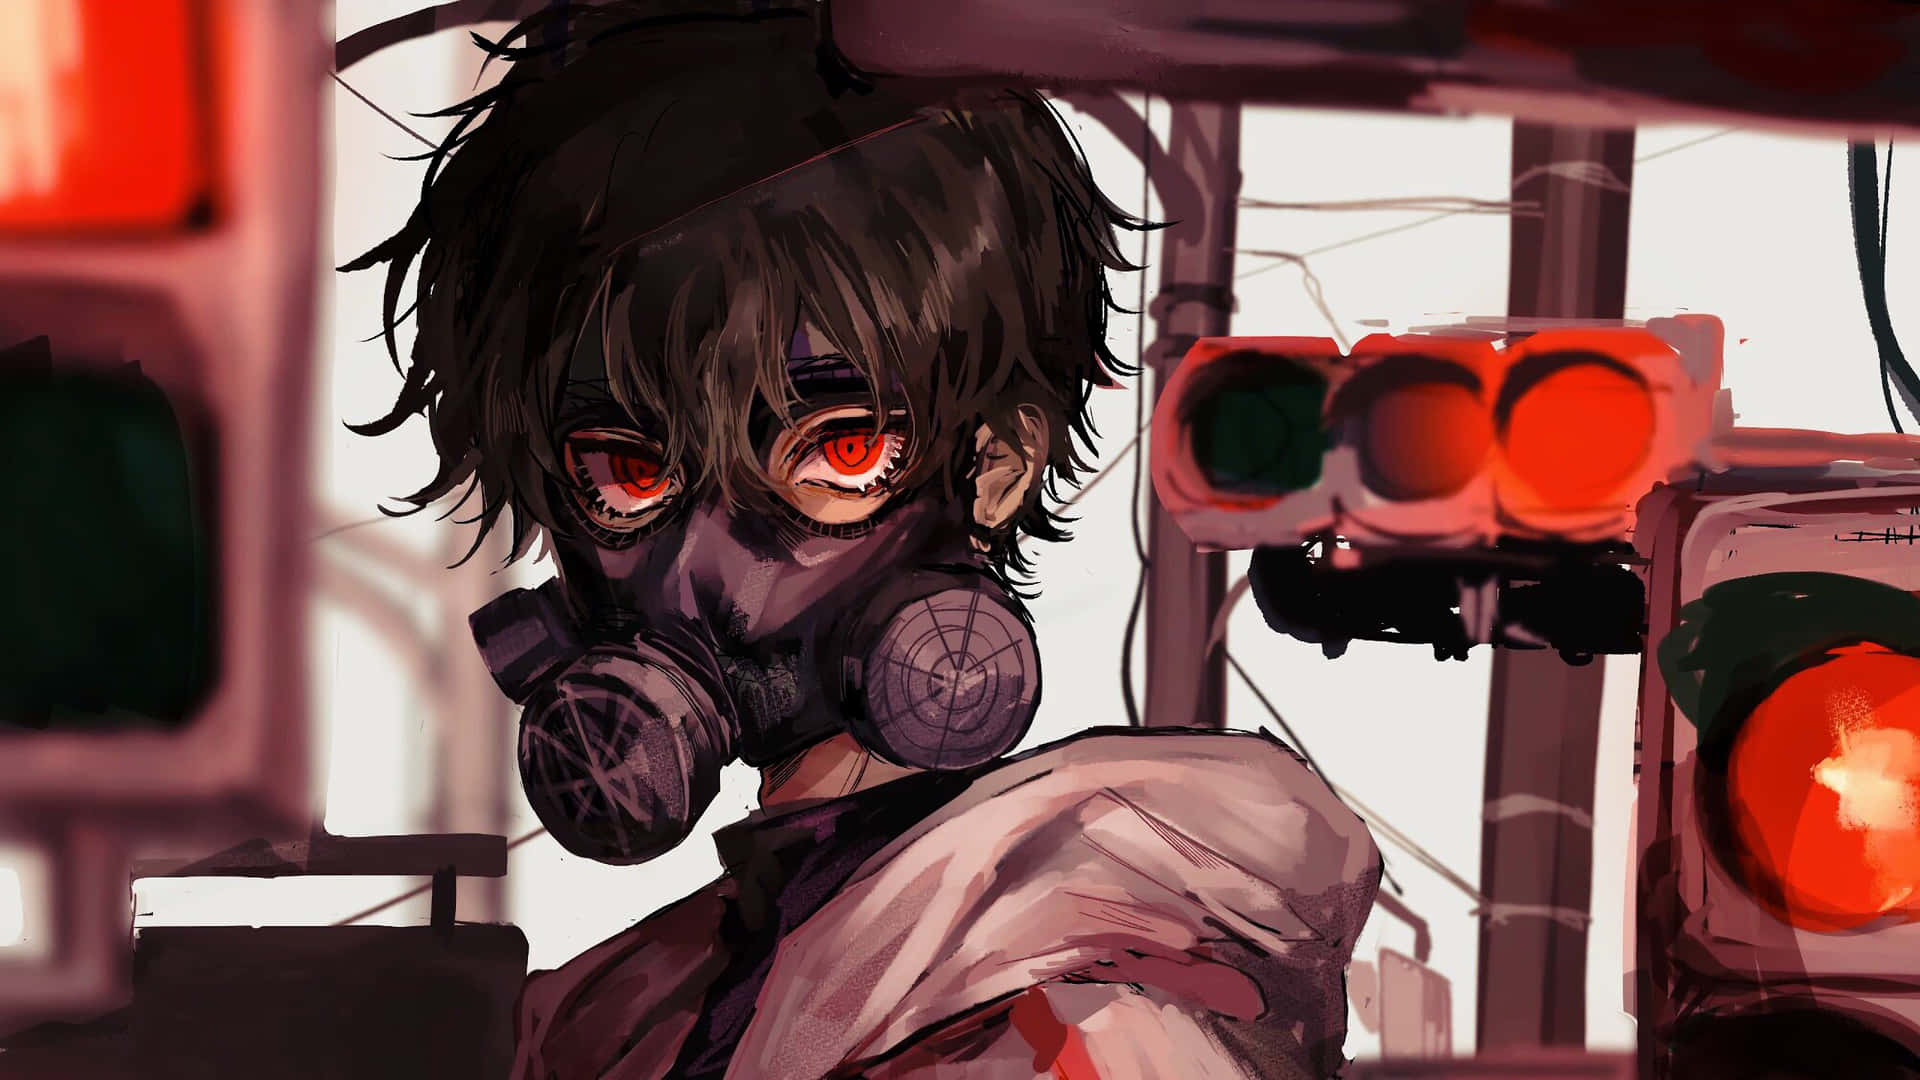 Free Anime Boy With Mask Wallpaper Downloads, [100+] Anime Boy With Mask  Wallpapers for FREE 